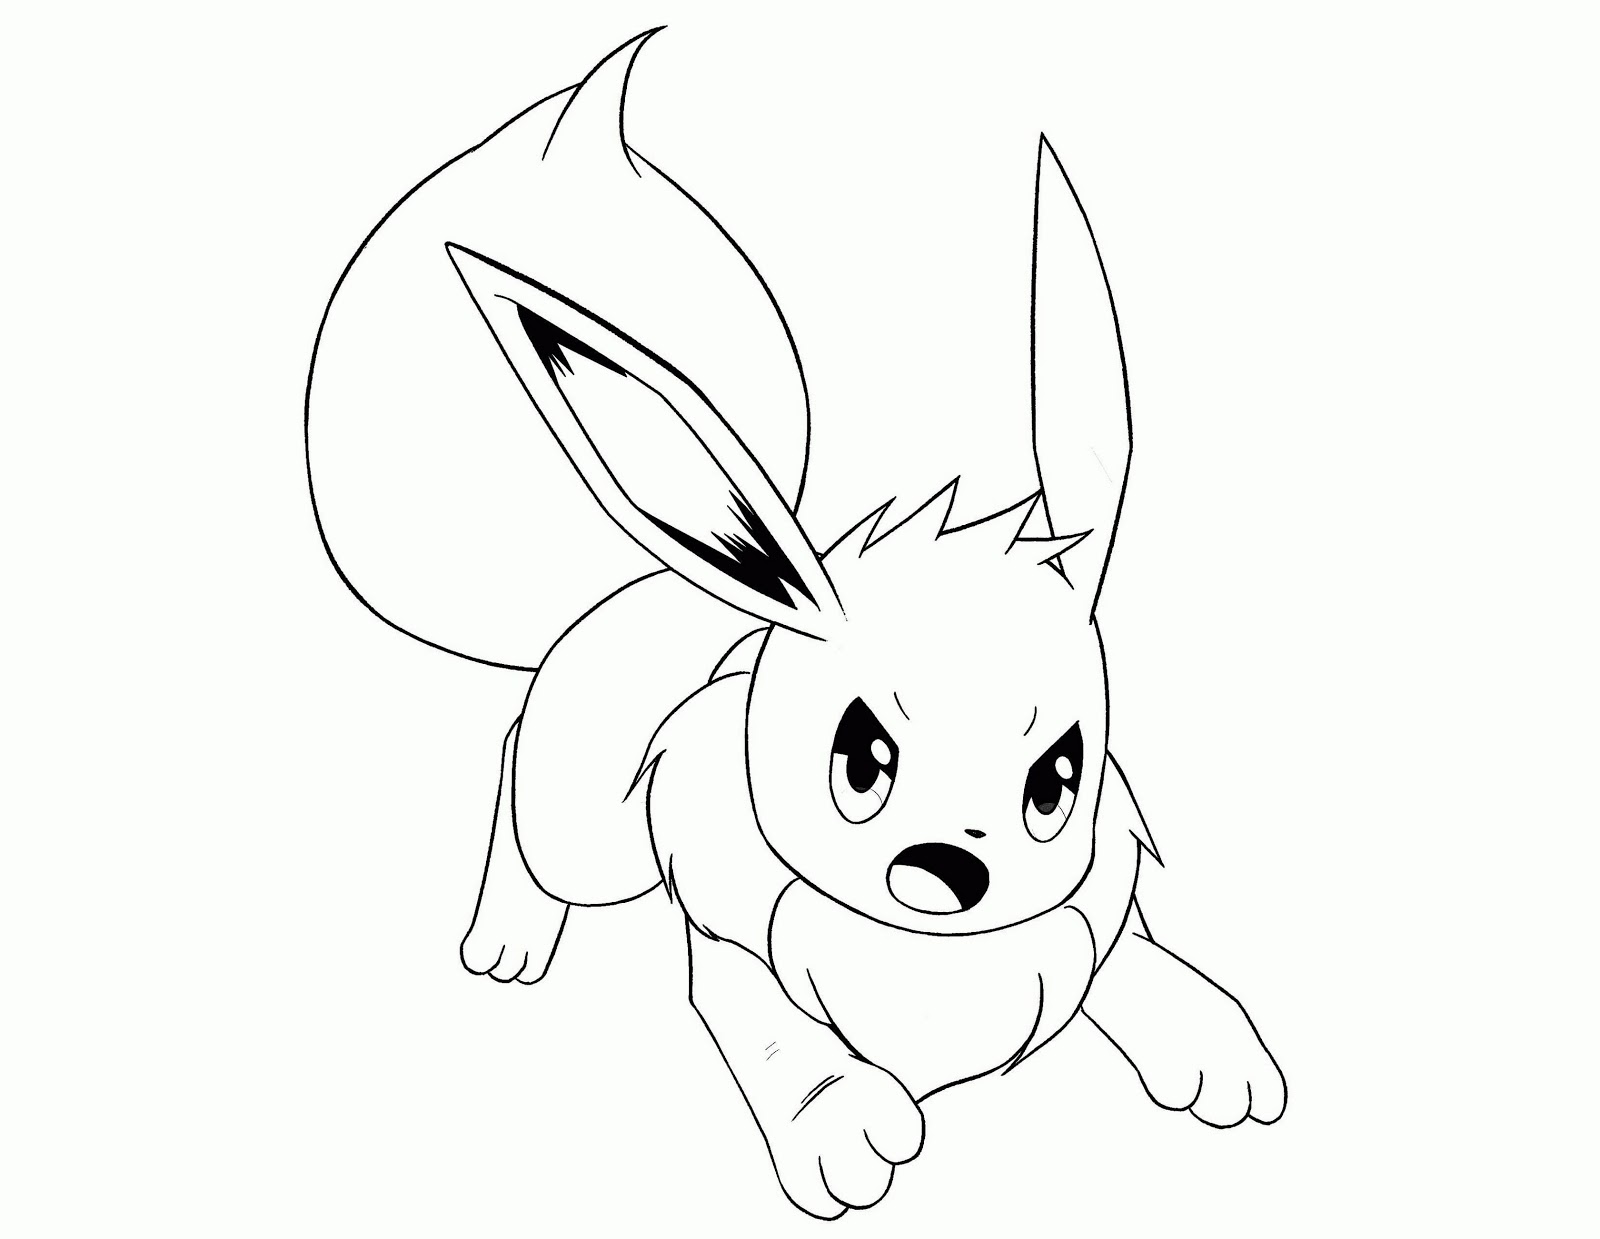 Eevee Coloring Pages Printable - Free Pokemon Coloring Pages